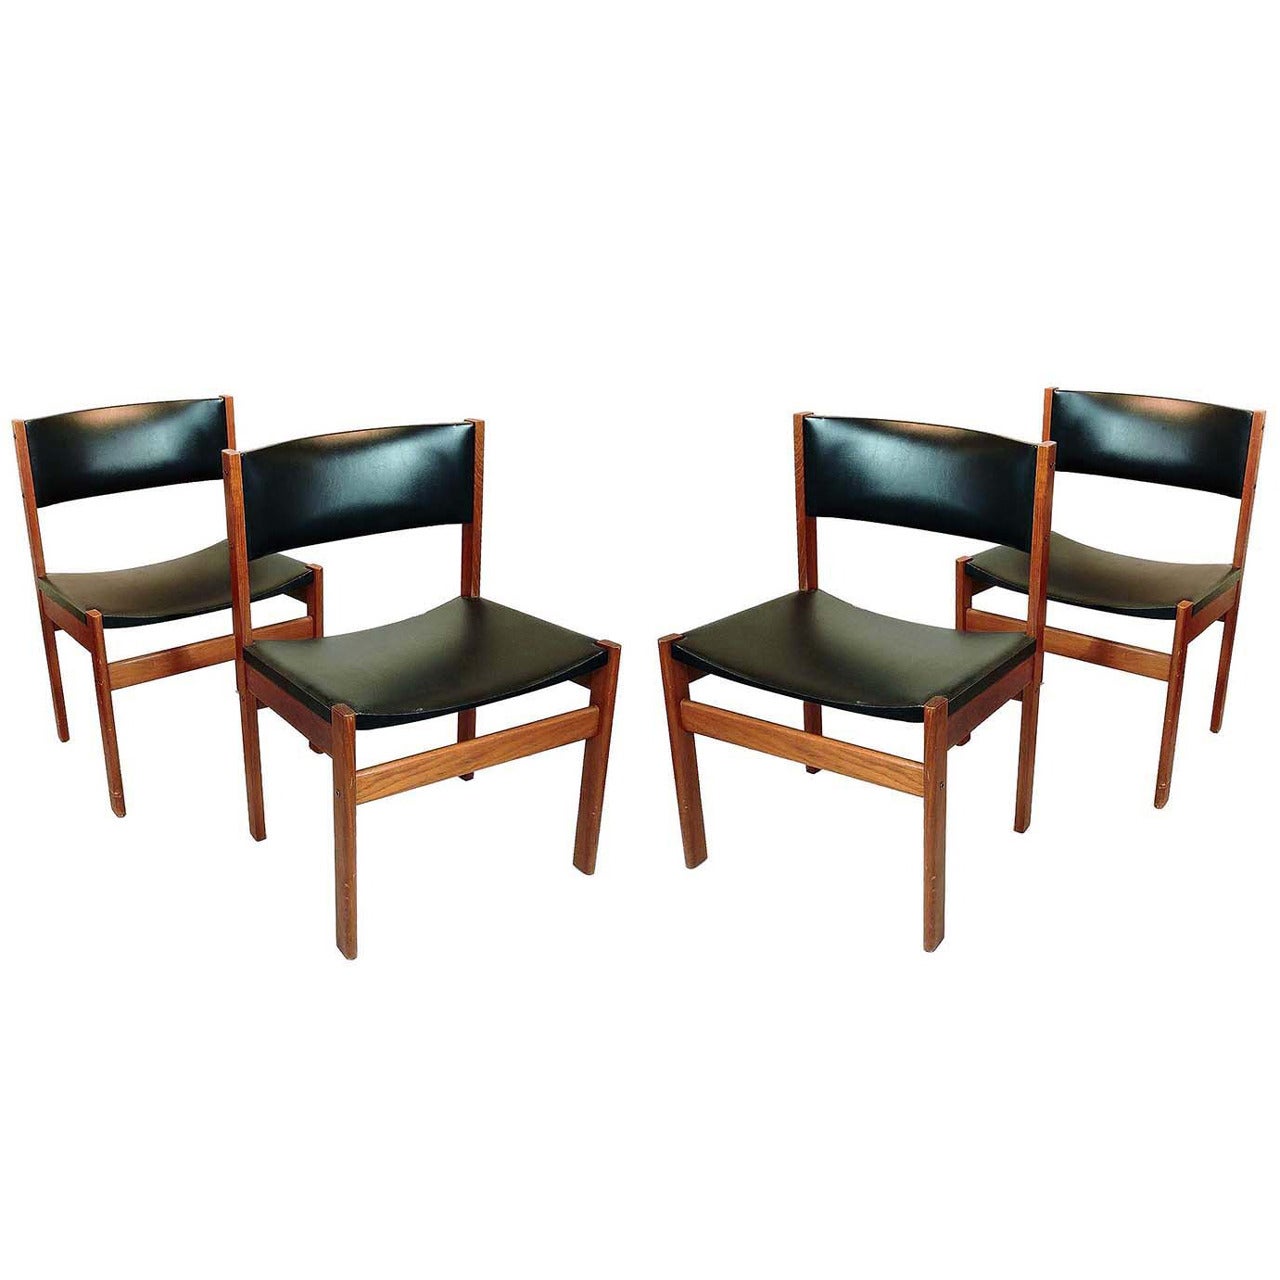 Set of Four Danish Mid-Century Modern Teak and Leather Dining Chairs For Sale